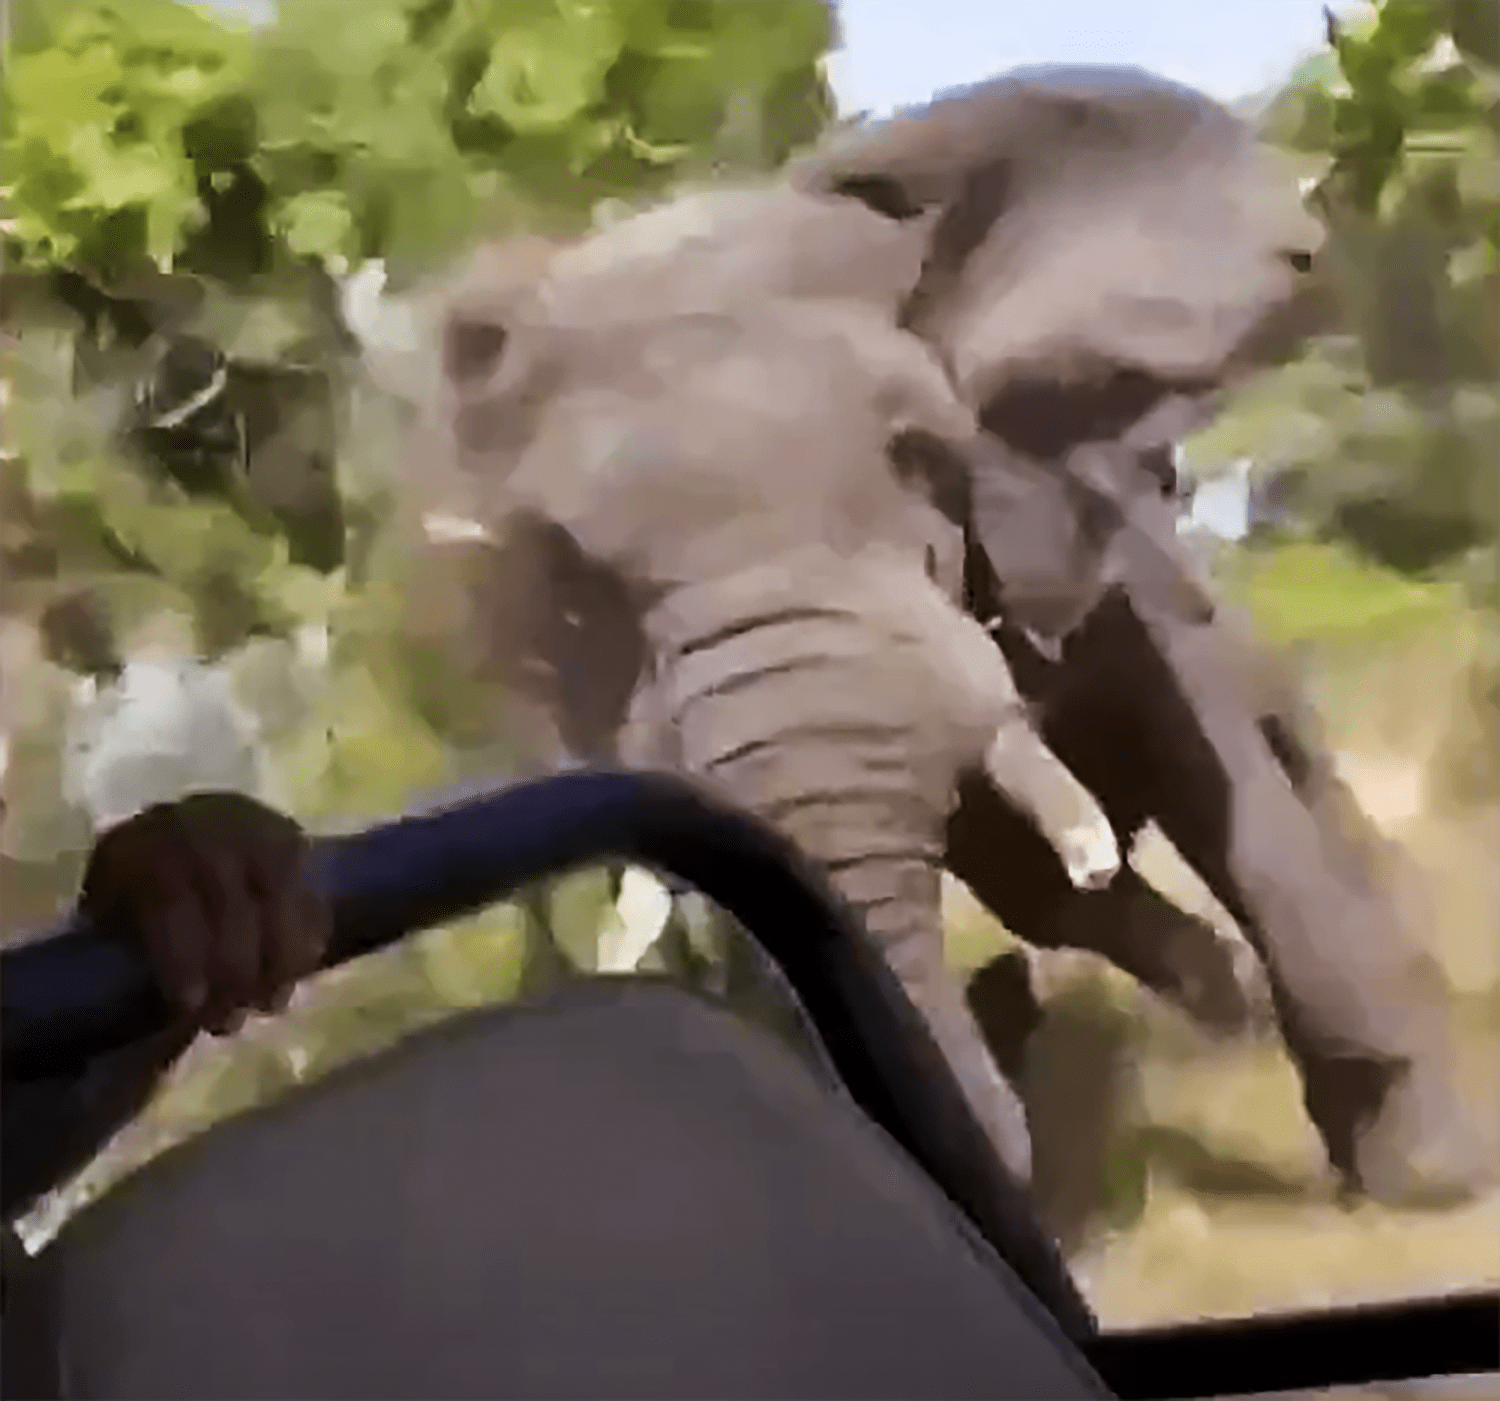 An American woman was killed after being set on fire by an elephant in Zambia